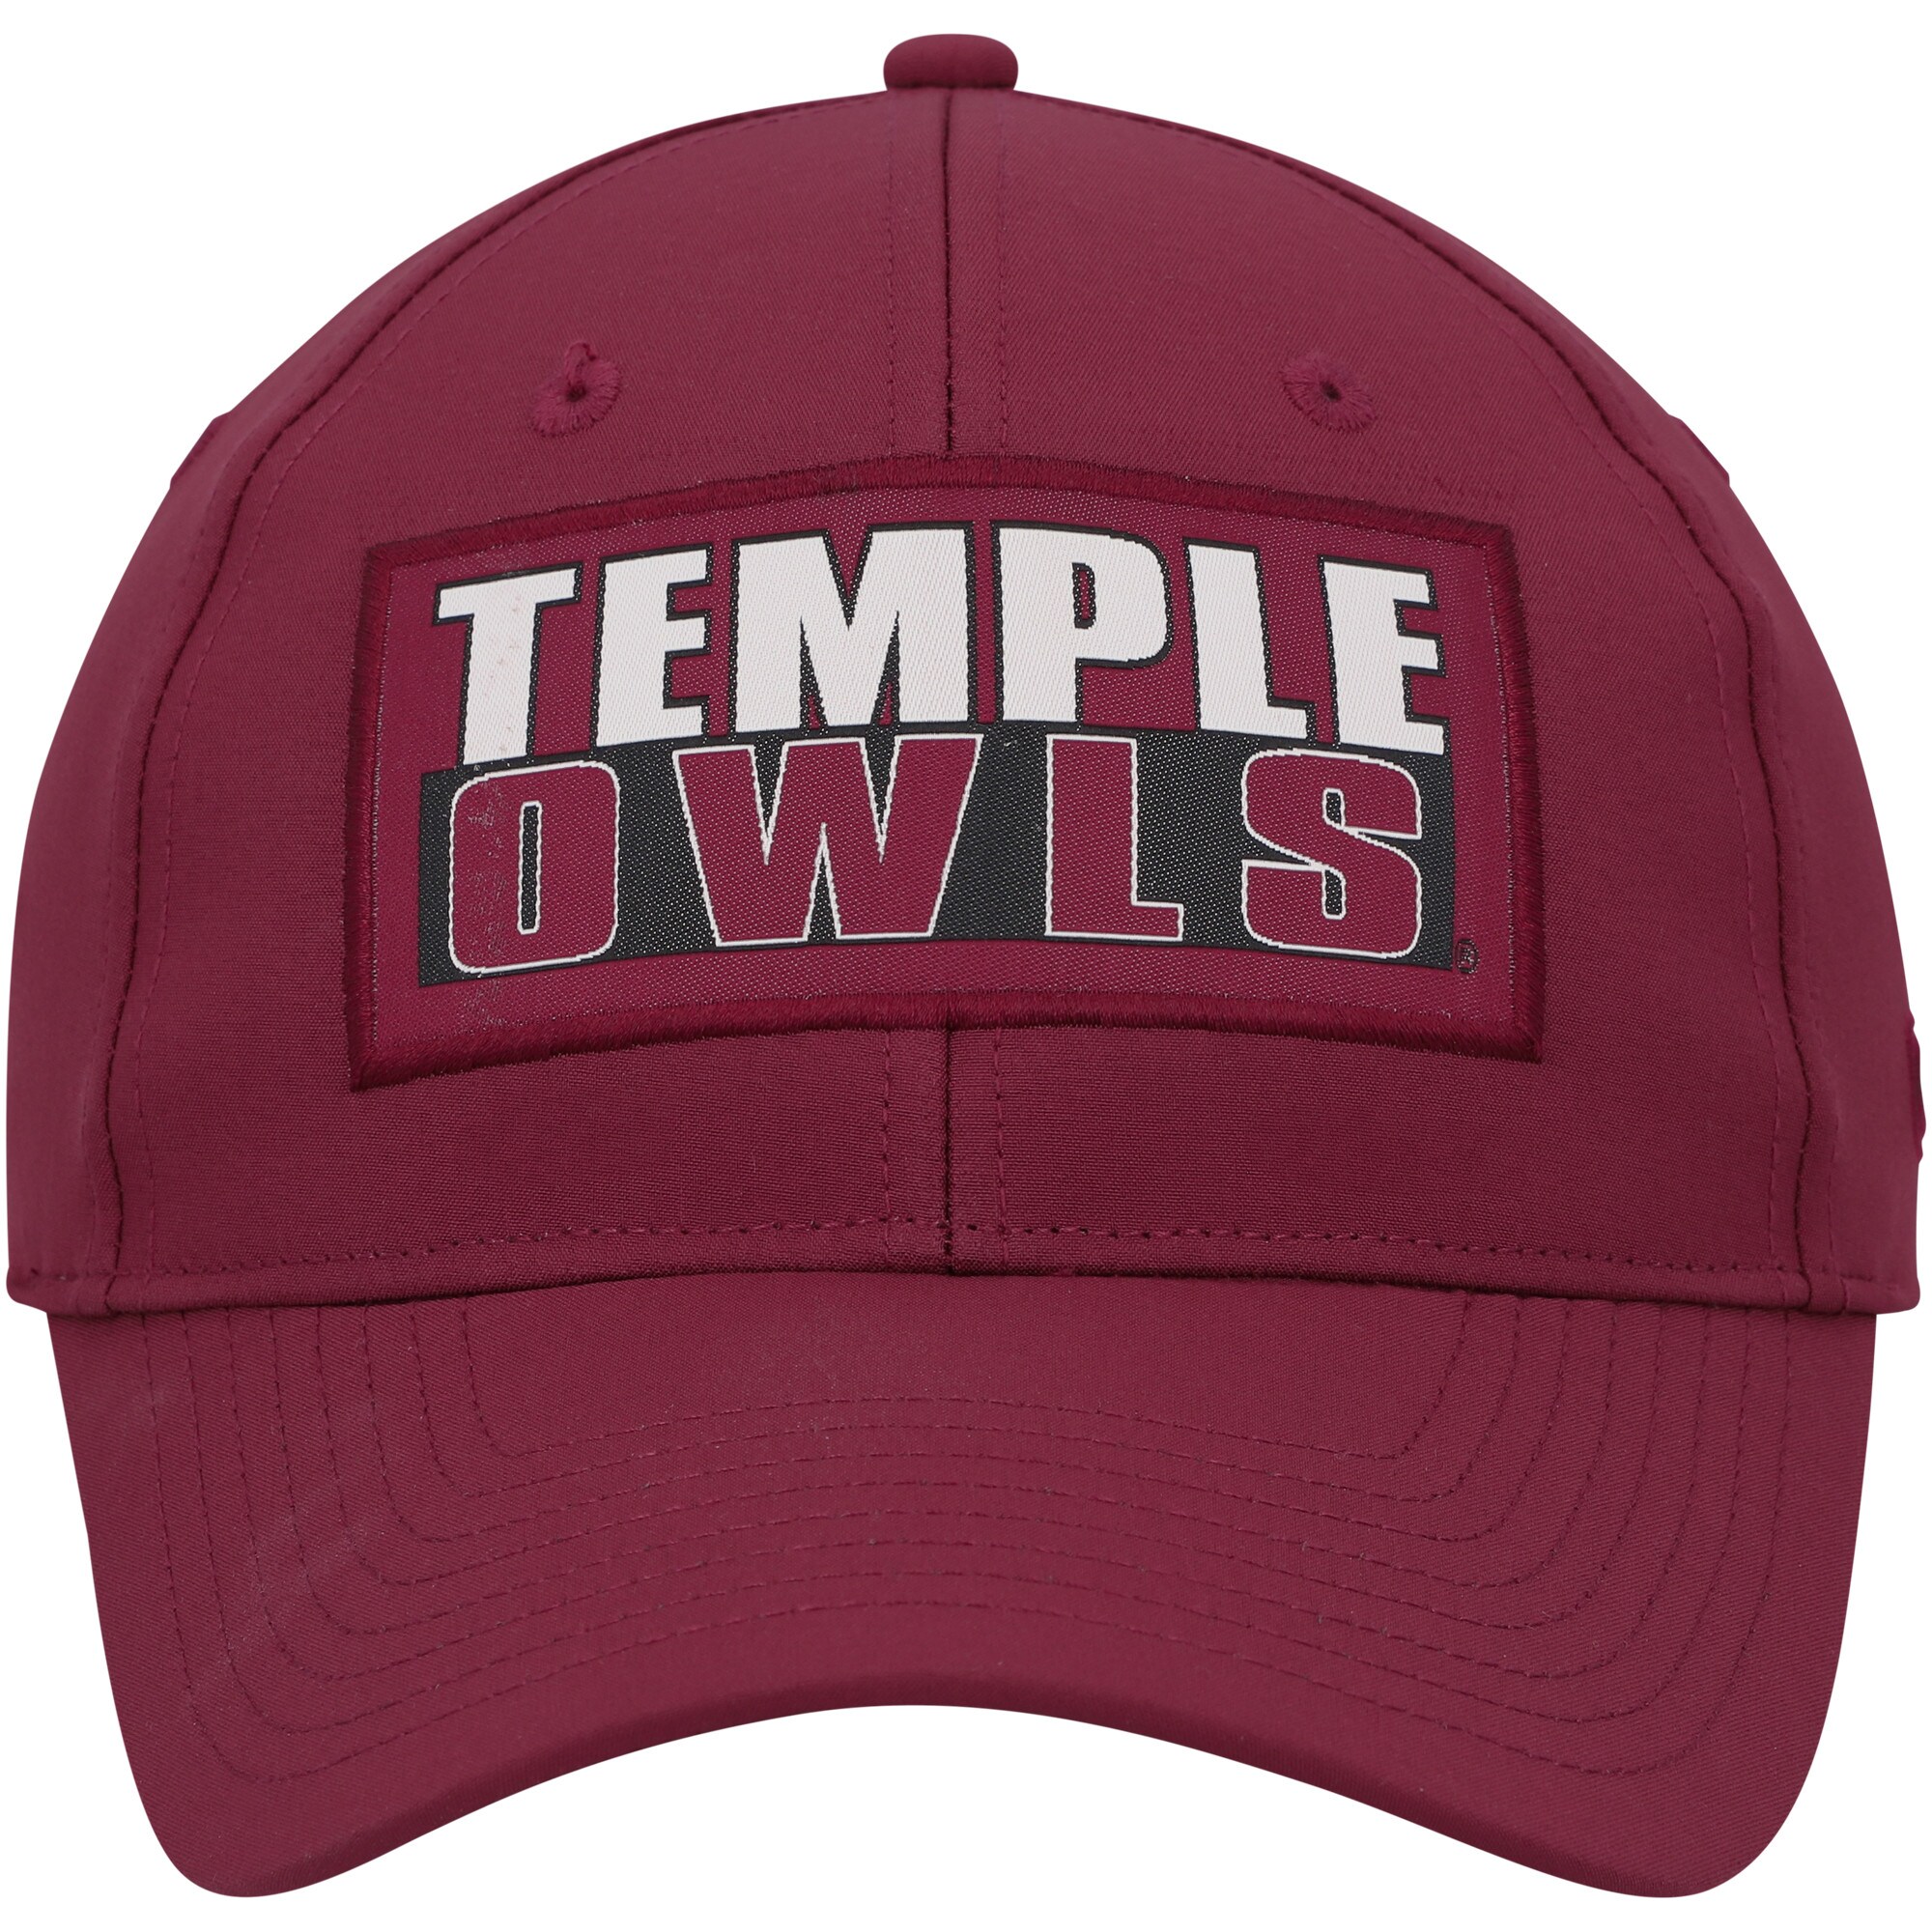 Men's Colosseum Cherry Temple Owls Positraction Snapback Hat - OSFA - image 2 of 4